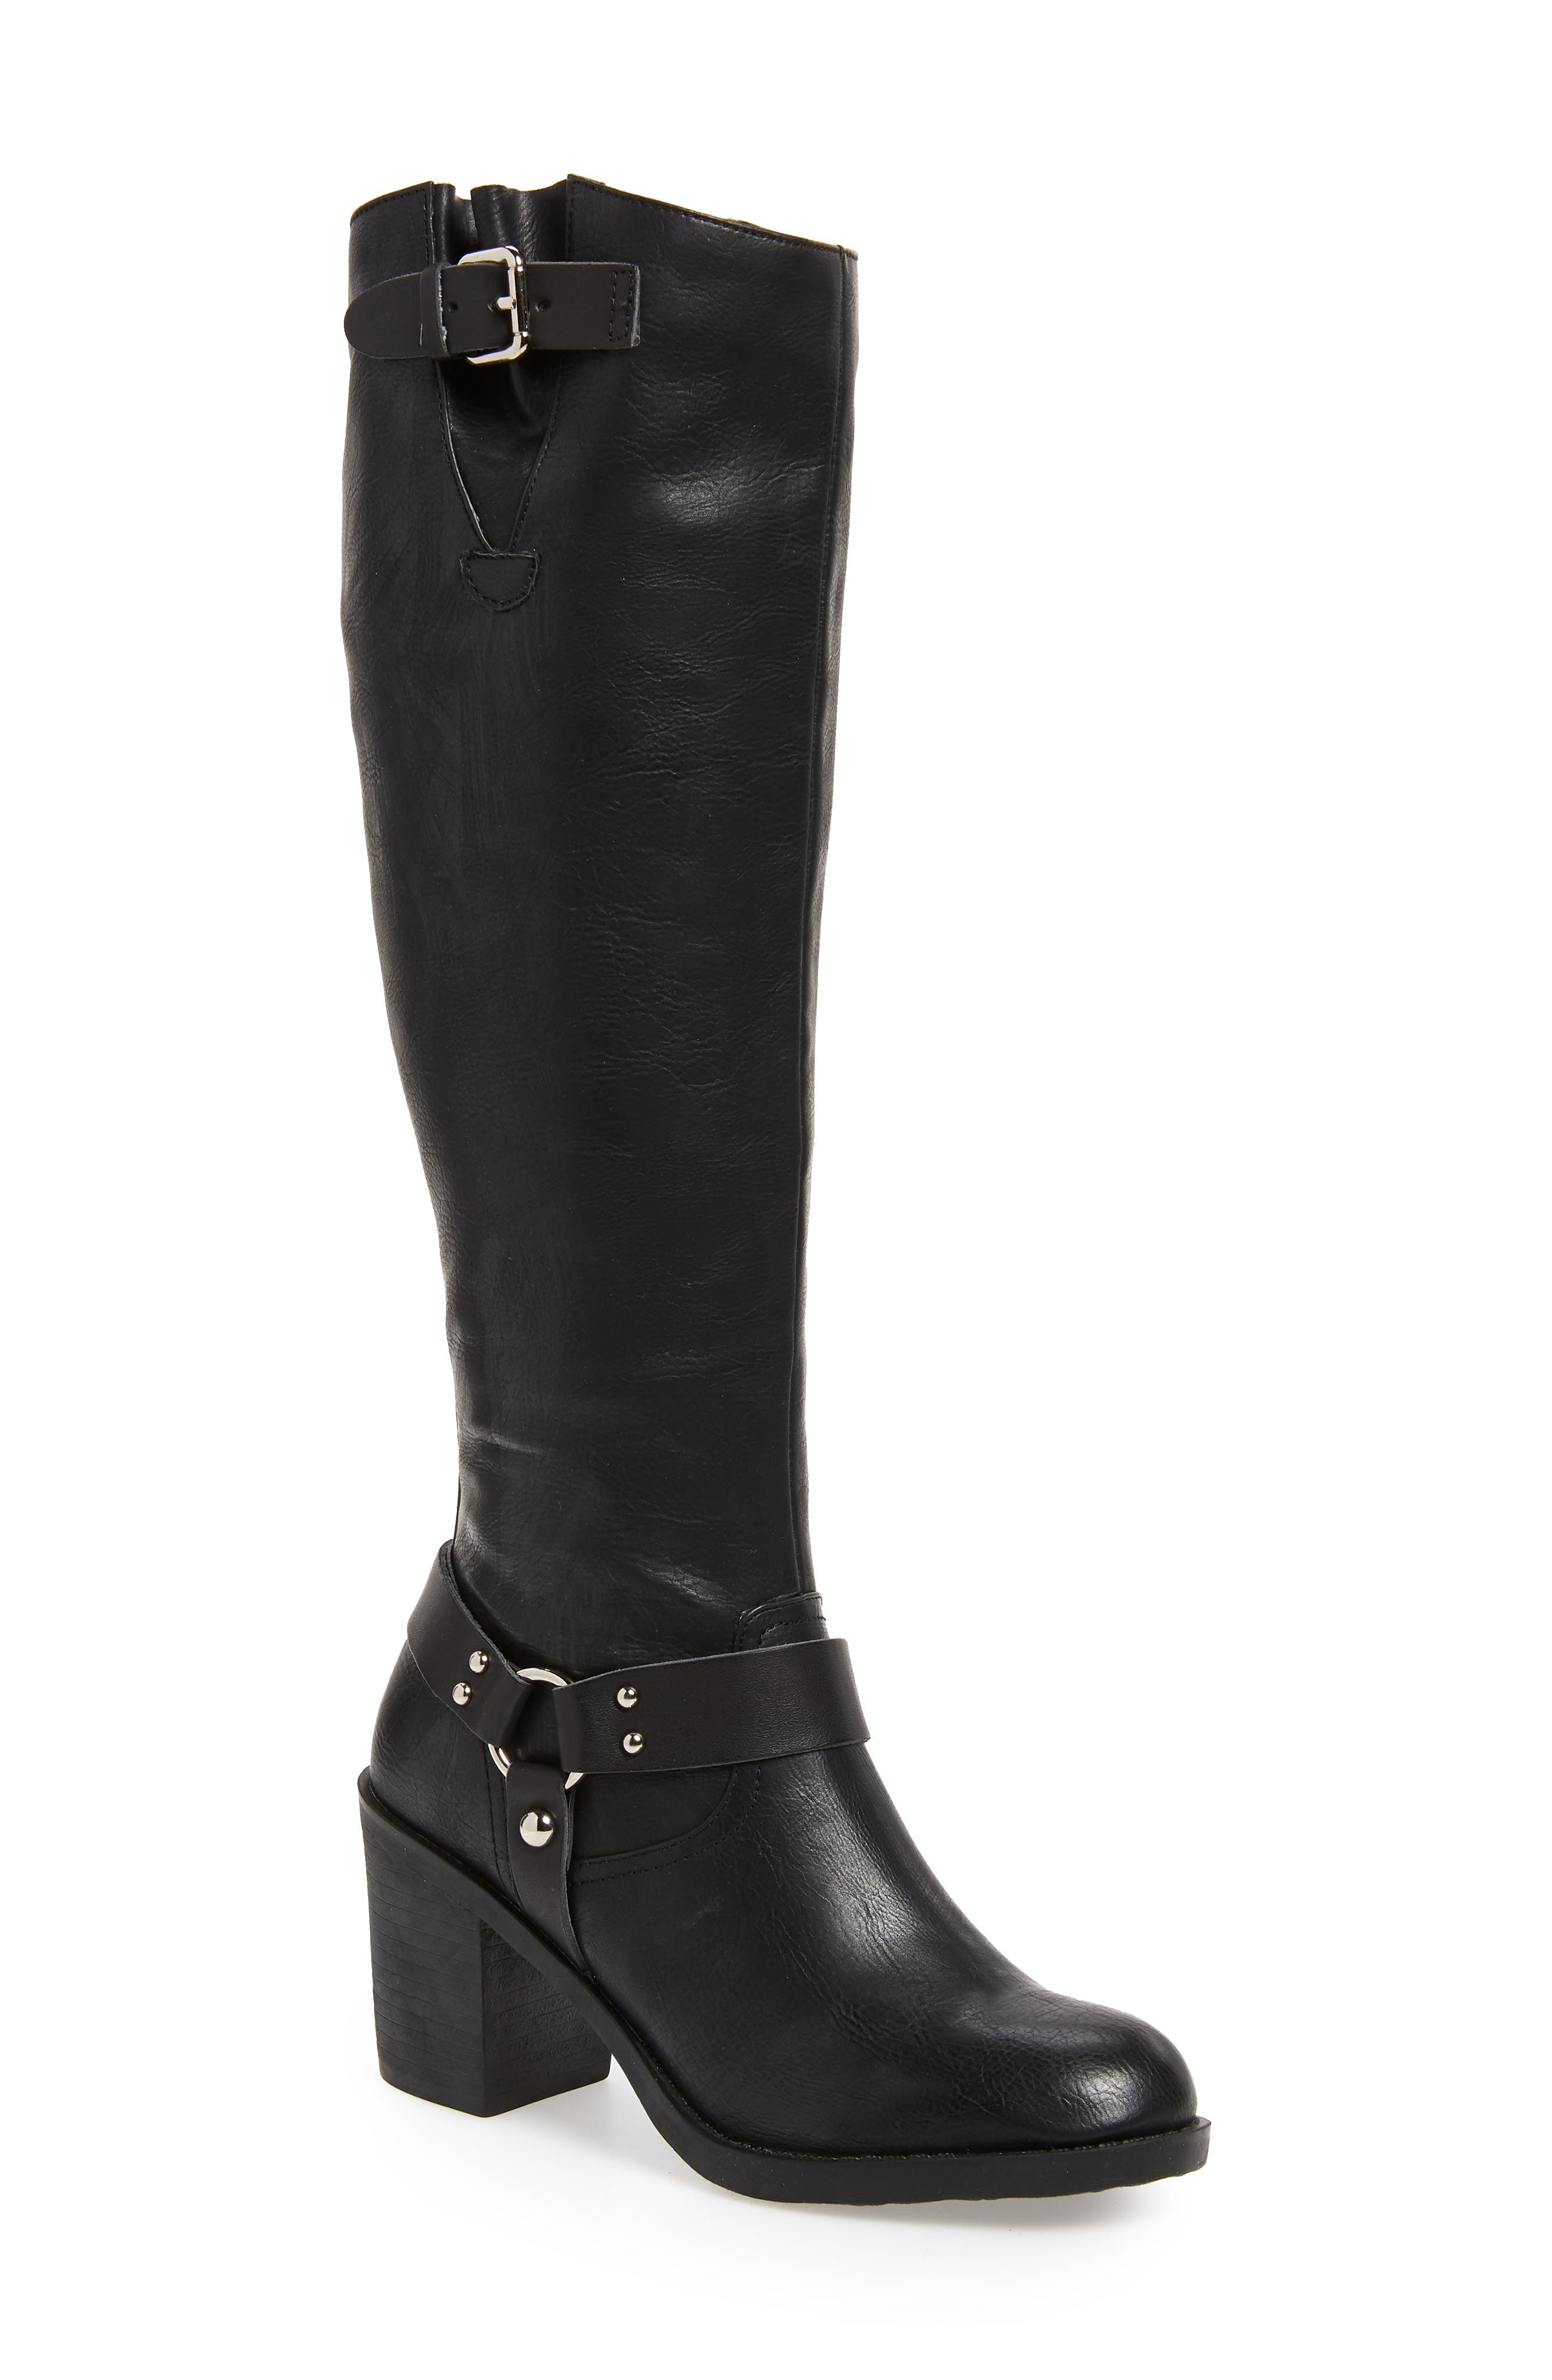 narrow calf knee high leather boots